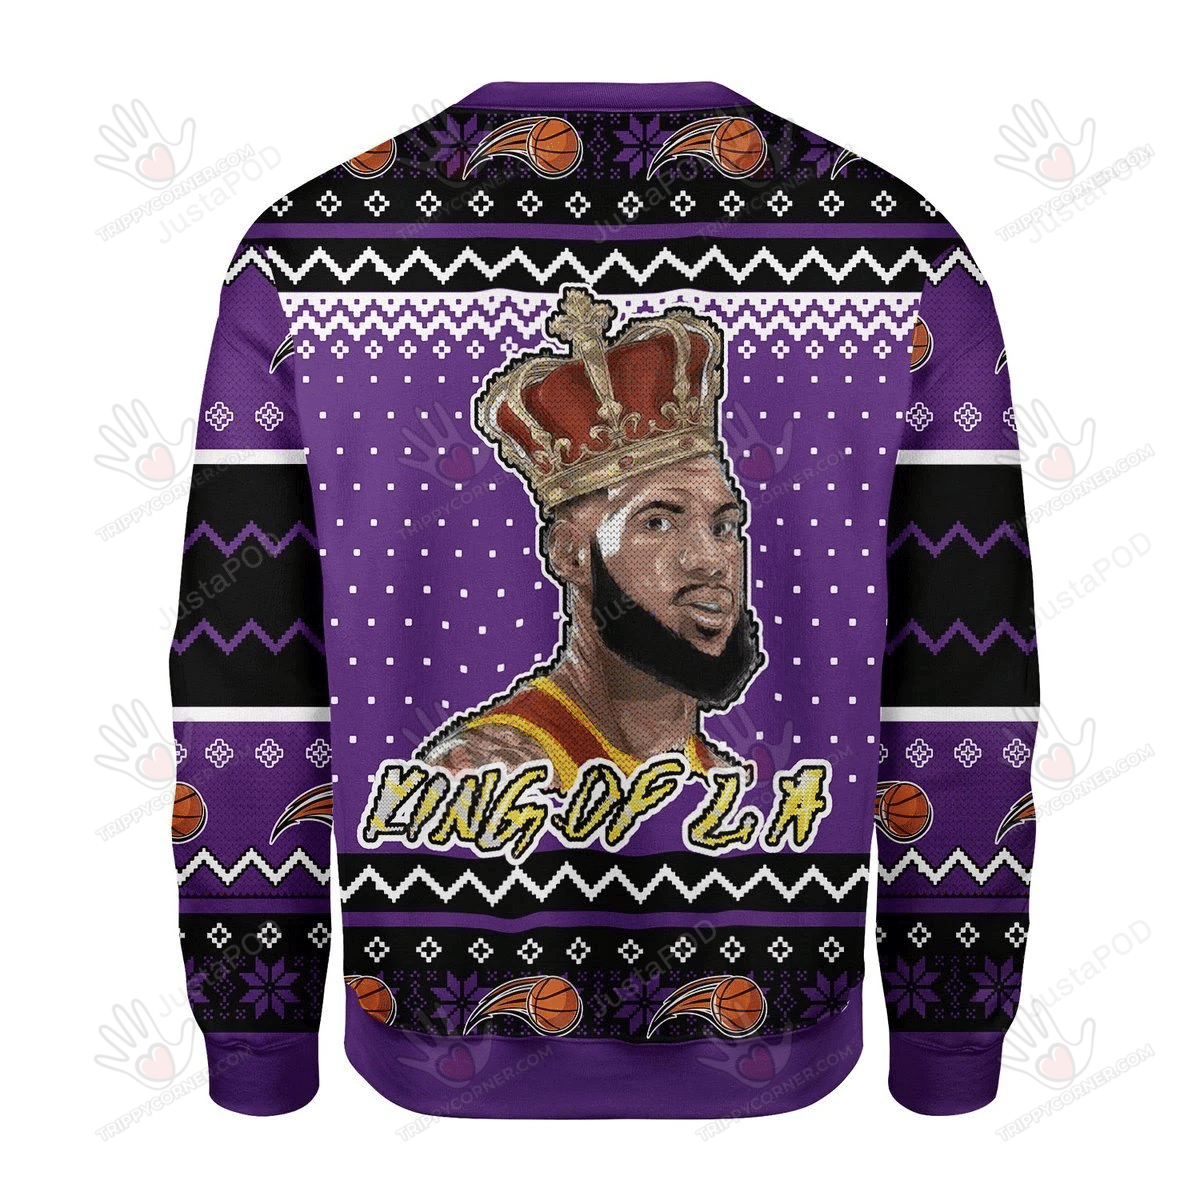 King Of La Ugly Christmas Sweater, All Over Print Sweatshirt, Ugly Sweater Christmas Gift   101